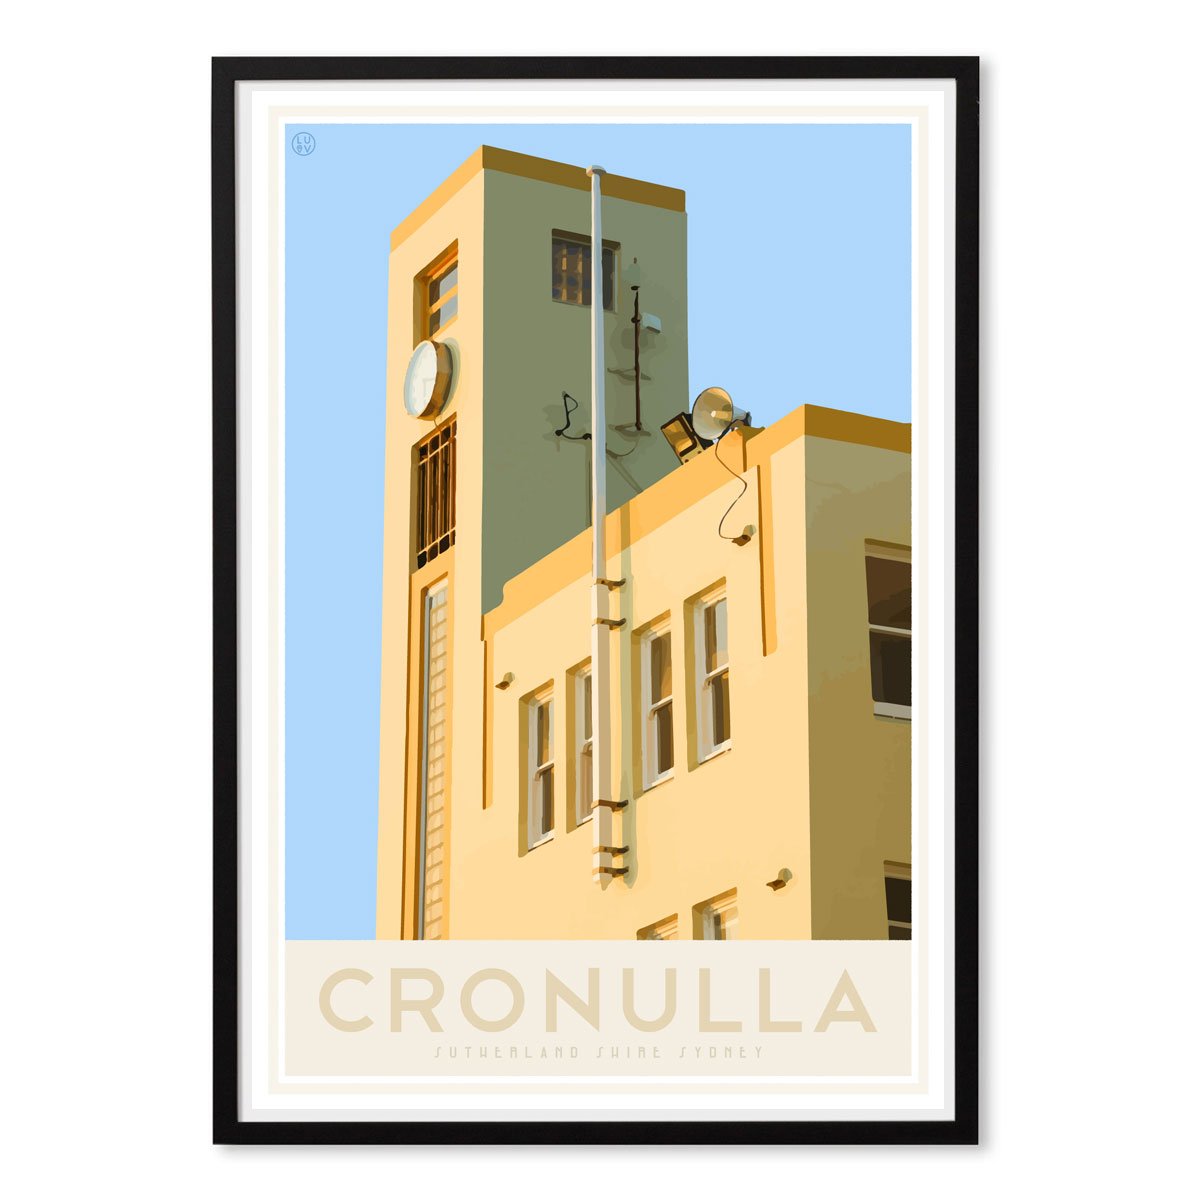 Cronulla Beach vintage travel style black framed print, designed by places we luv